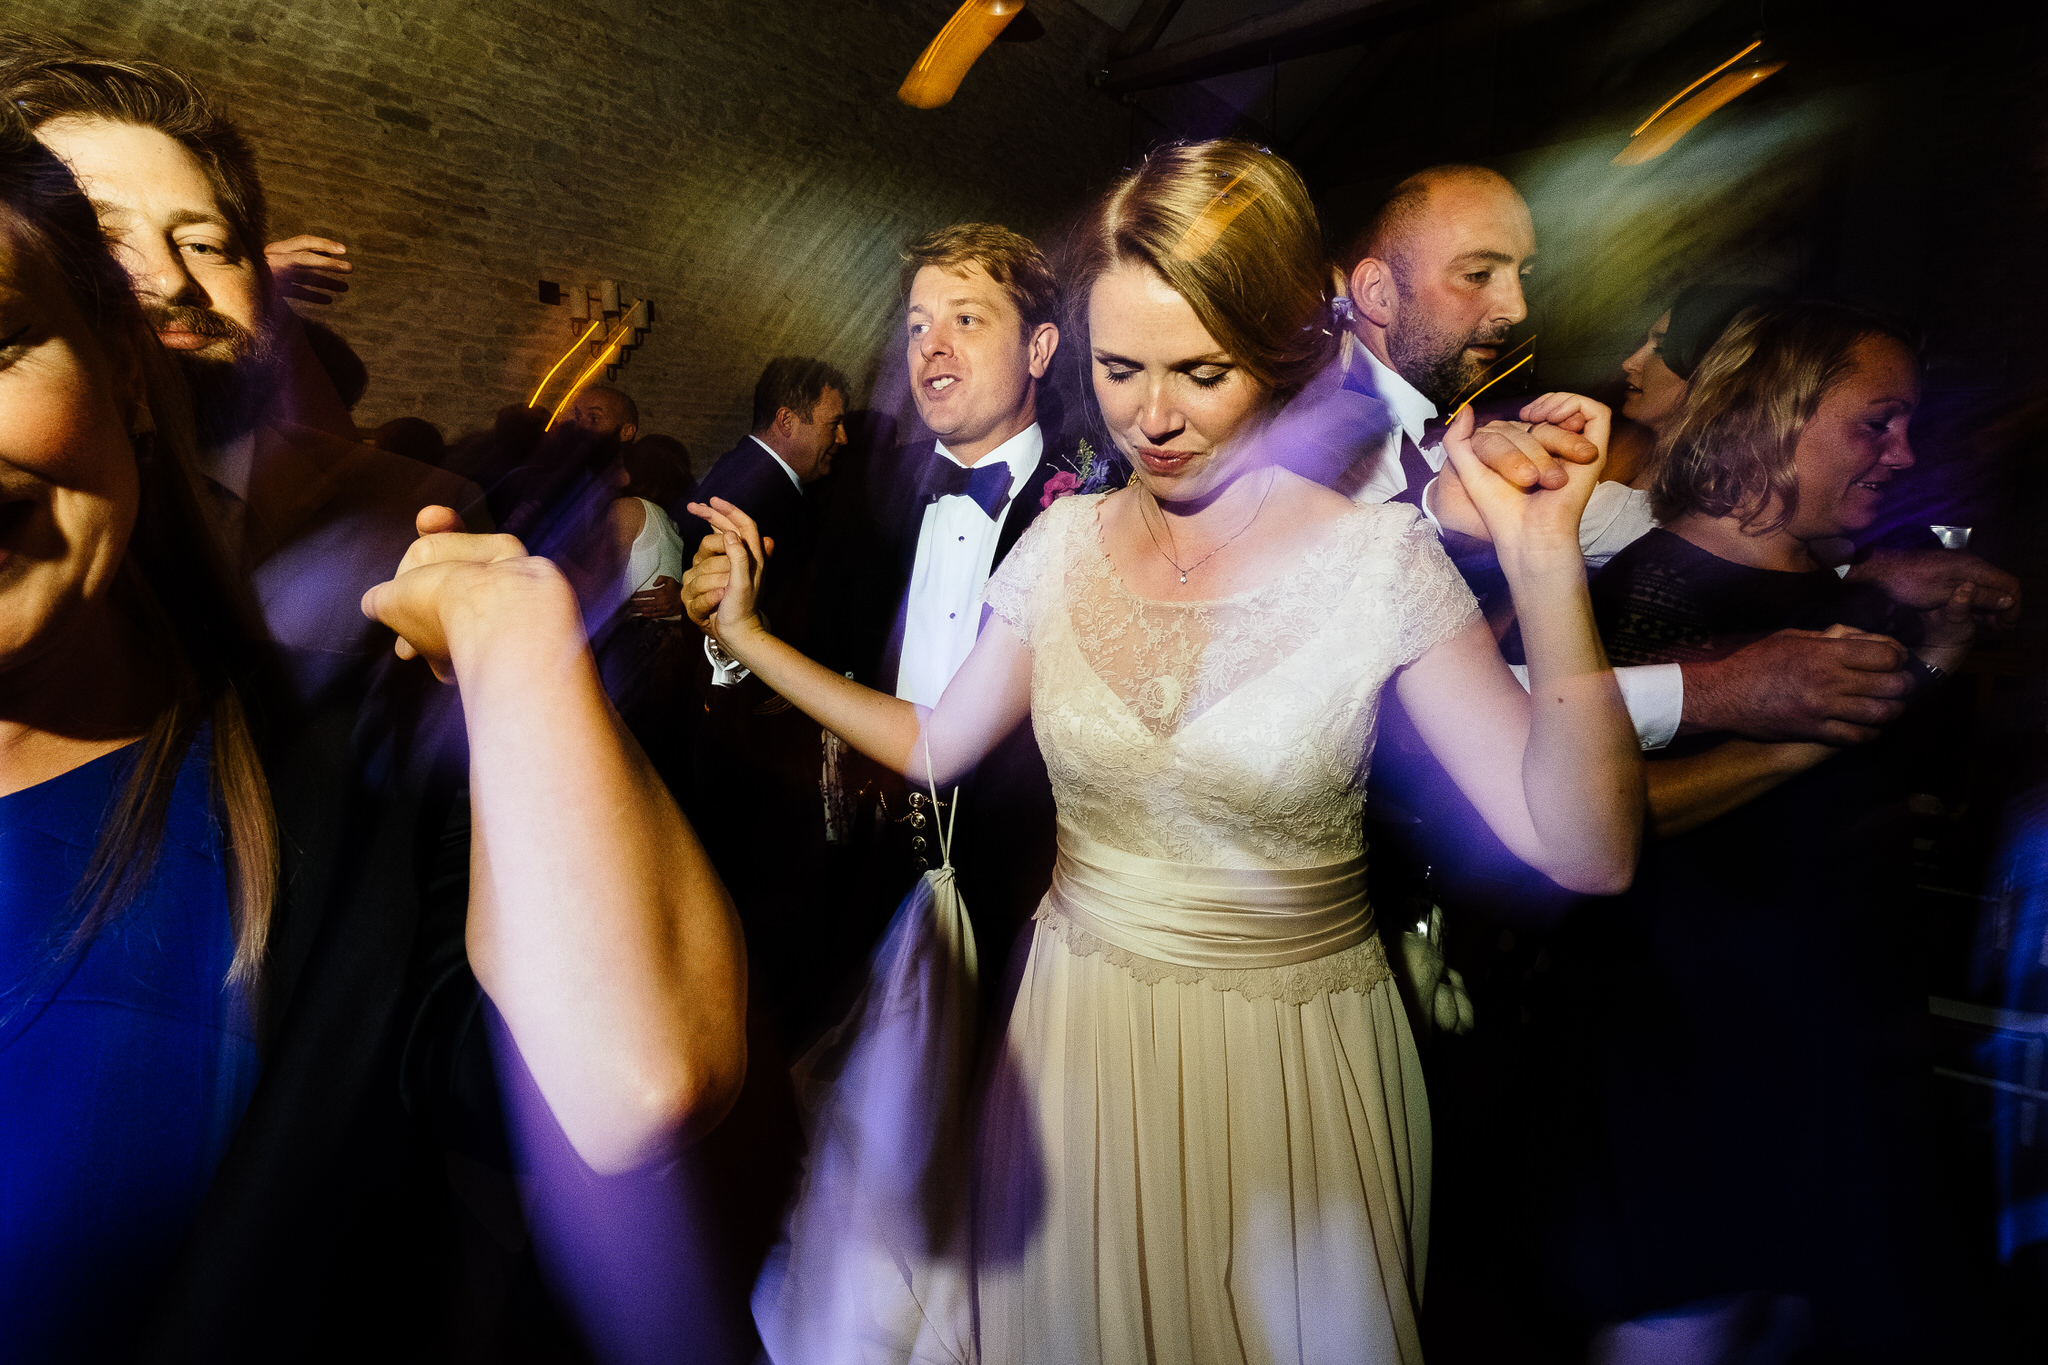 A bride and groom partying at a wedding at Merriscourt Wedding Venue, Oxfordshire